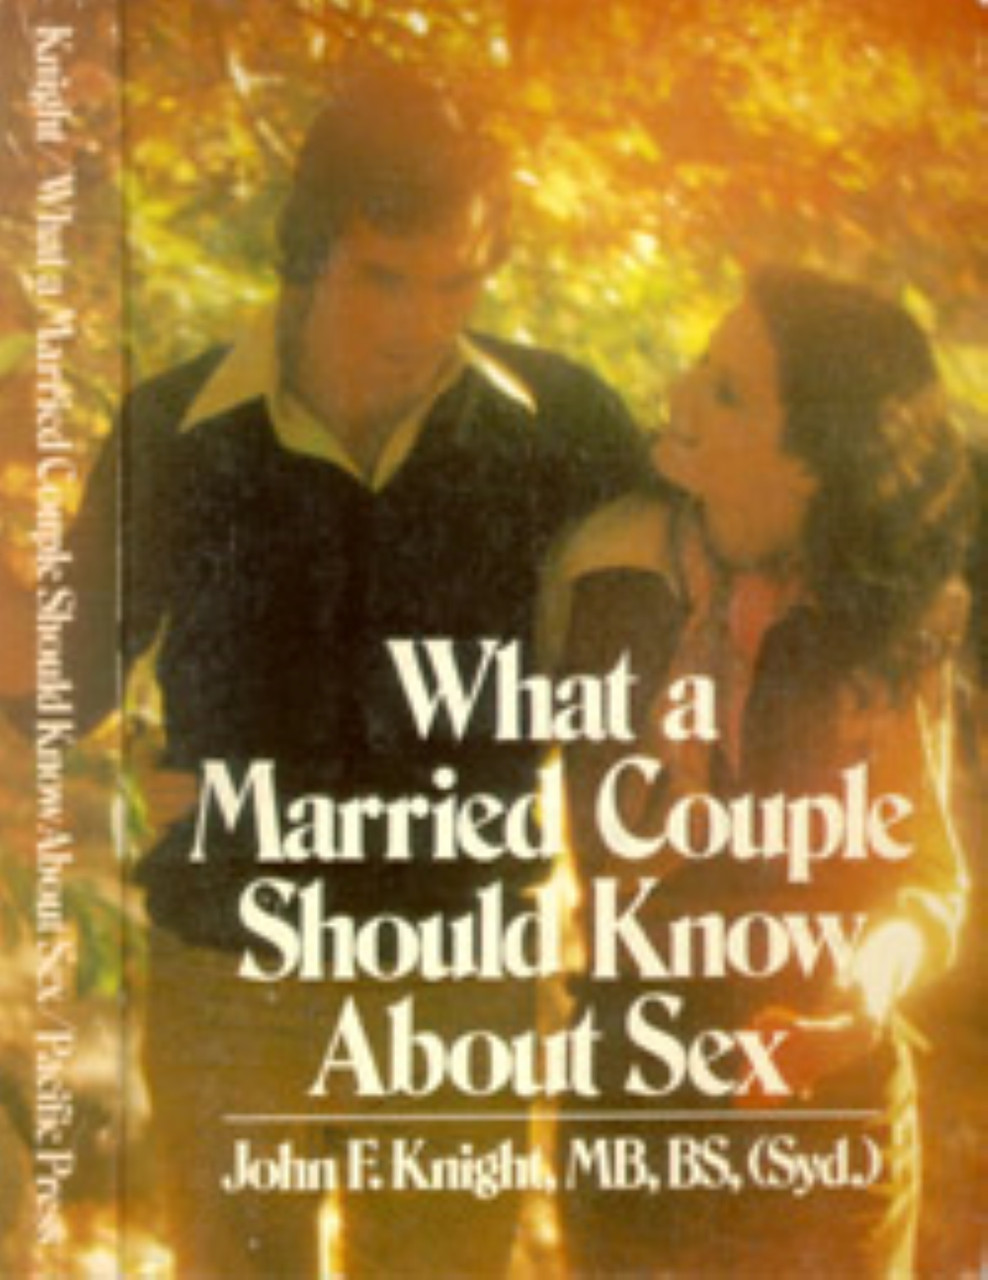 What a Married Couple Should Know About Sex / Knight, John F